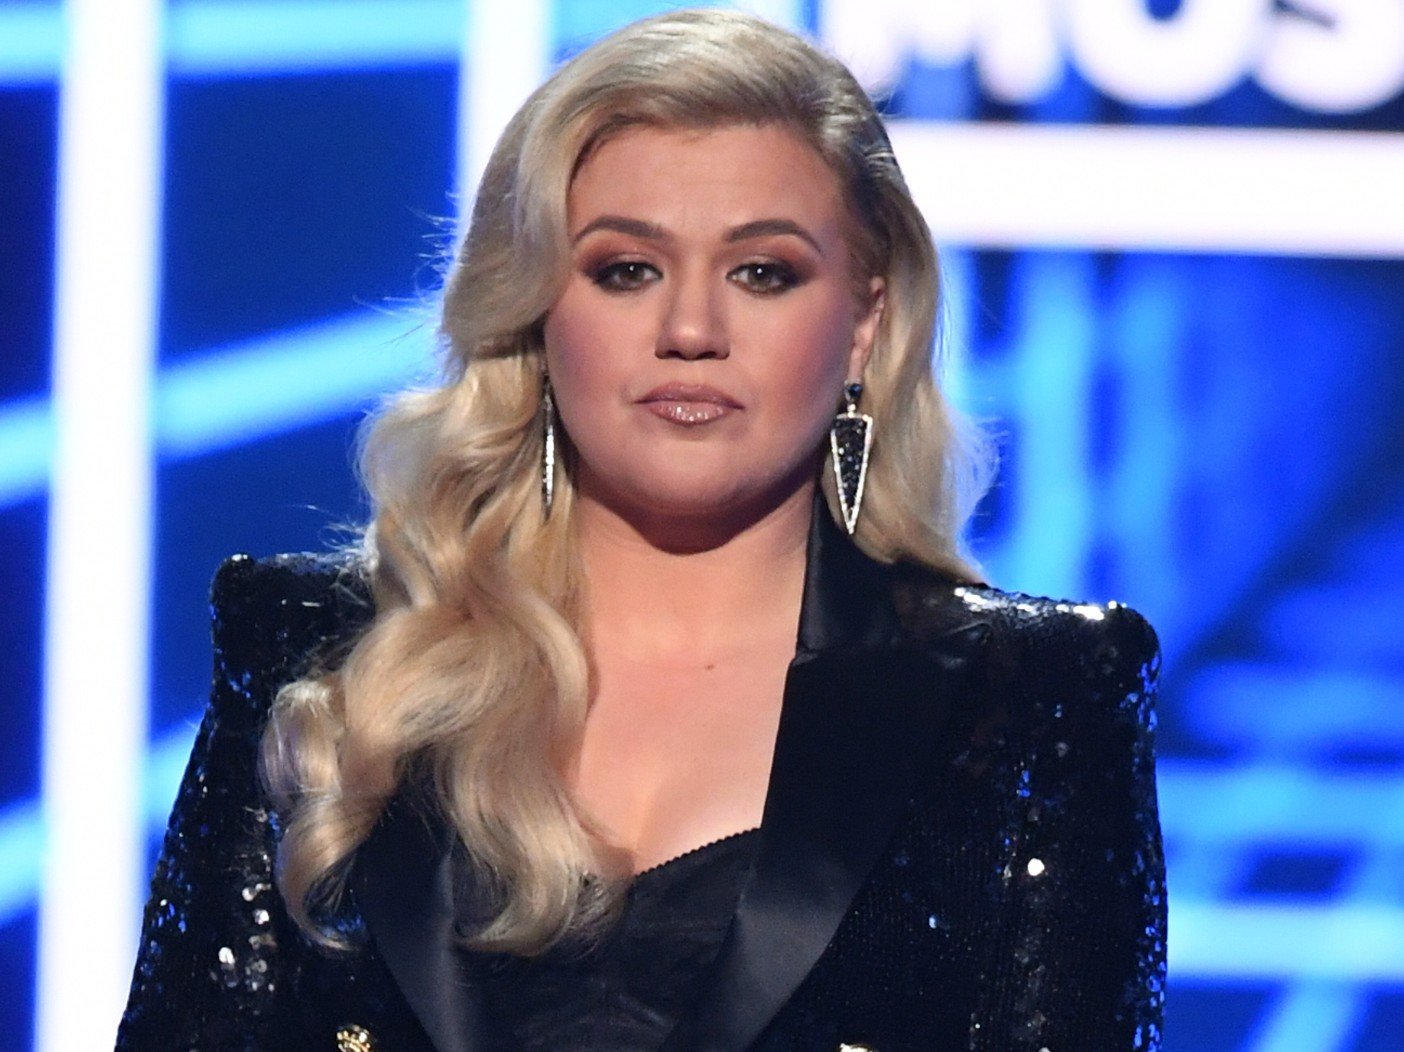 Kelly Clarkson Allegedly Struggling With ‘Custody Nightmare,' Latest Gossip Says